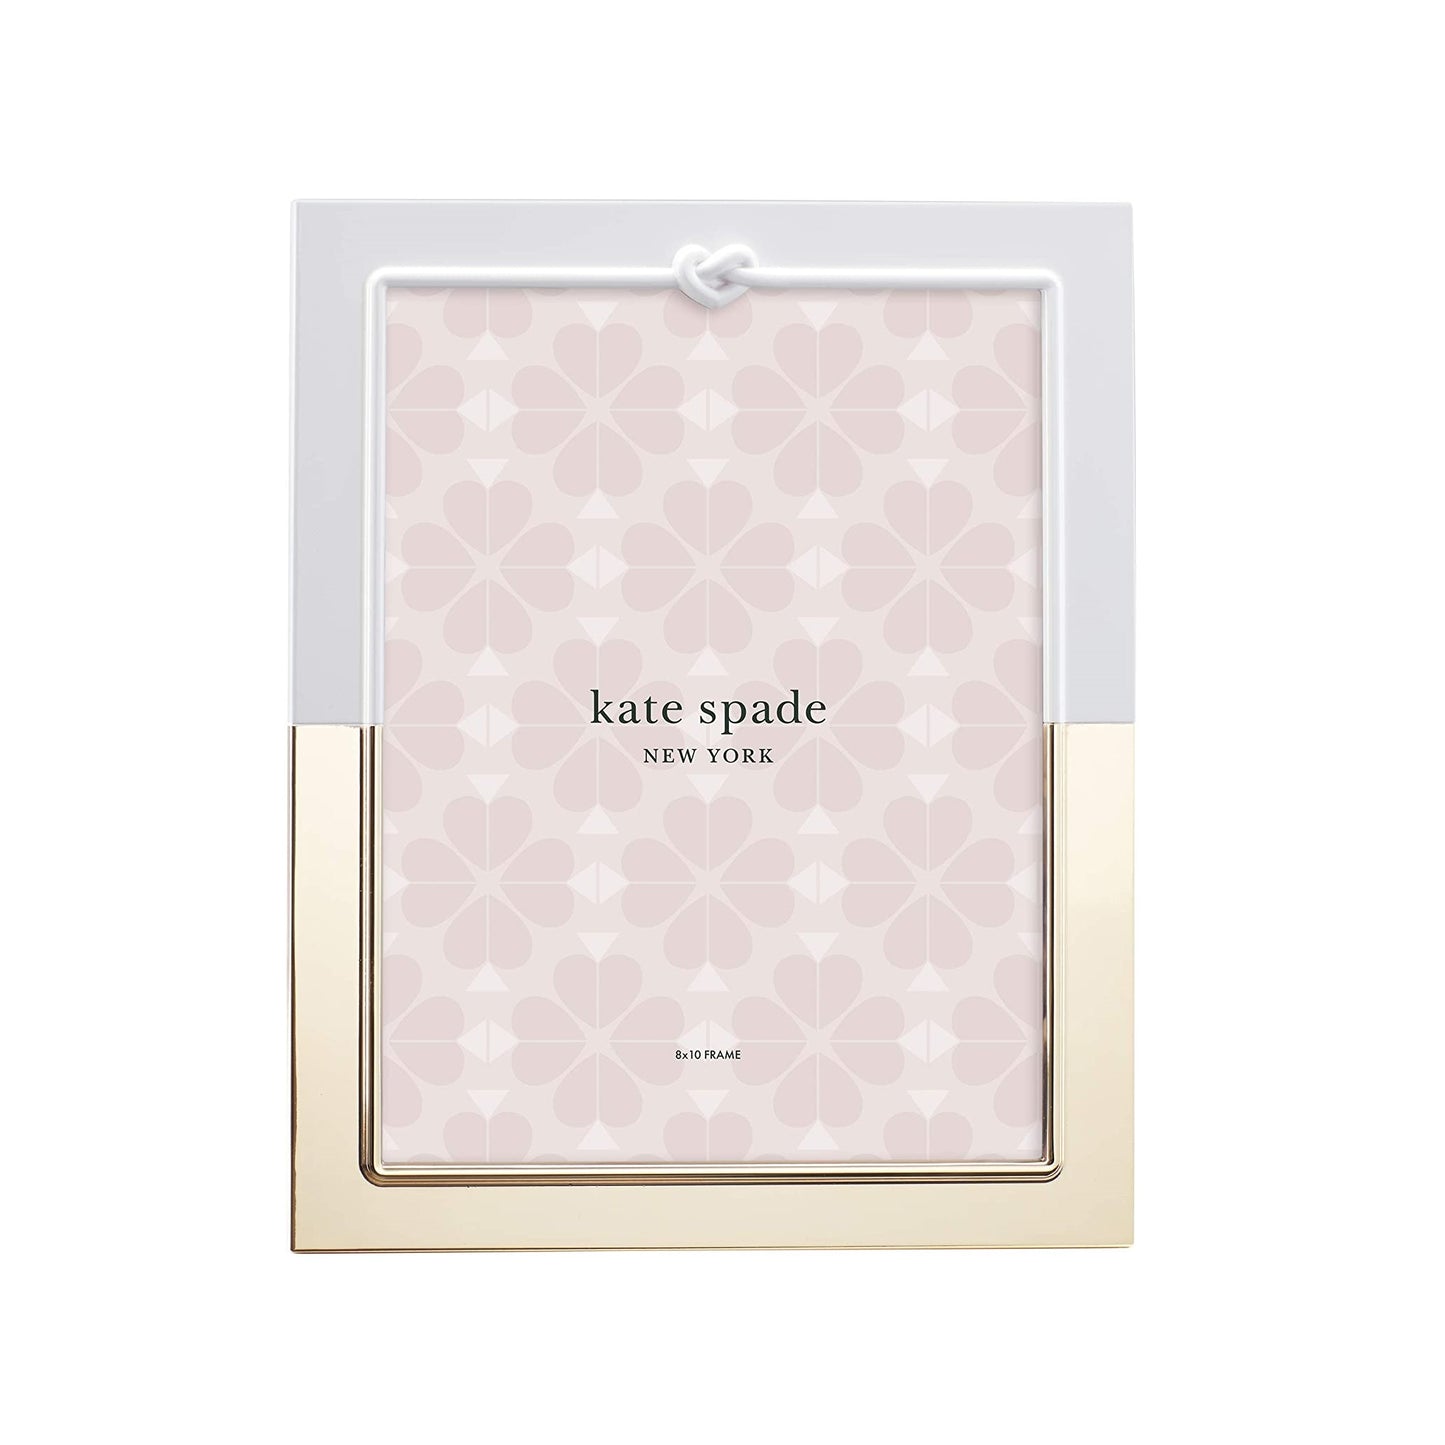 Kate Spade New York With Love 8x10 Frame by Lenox